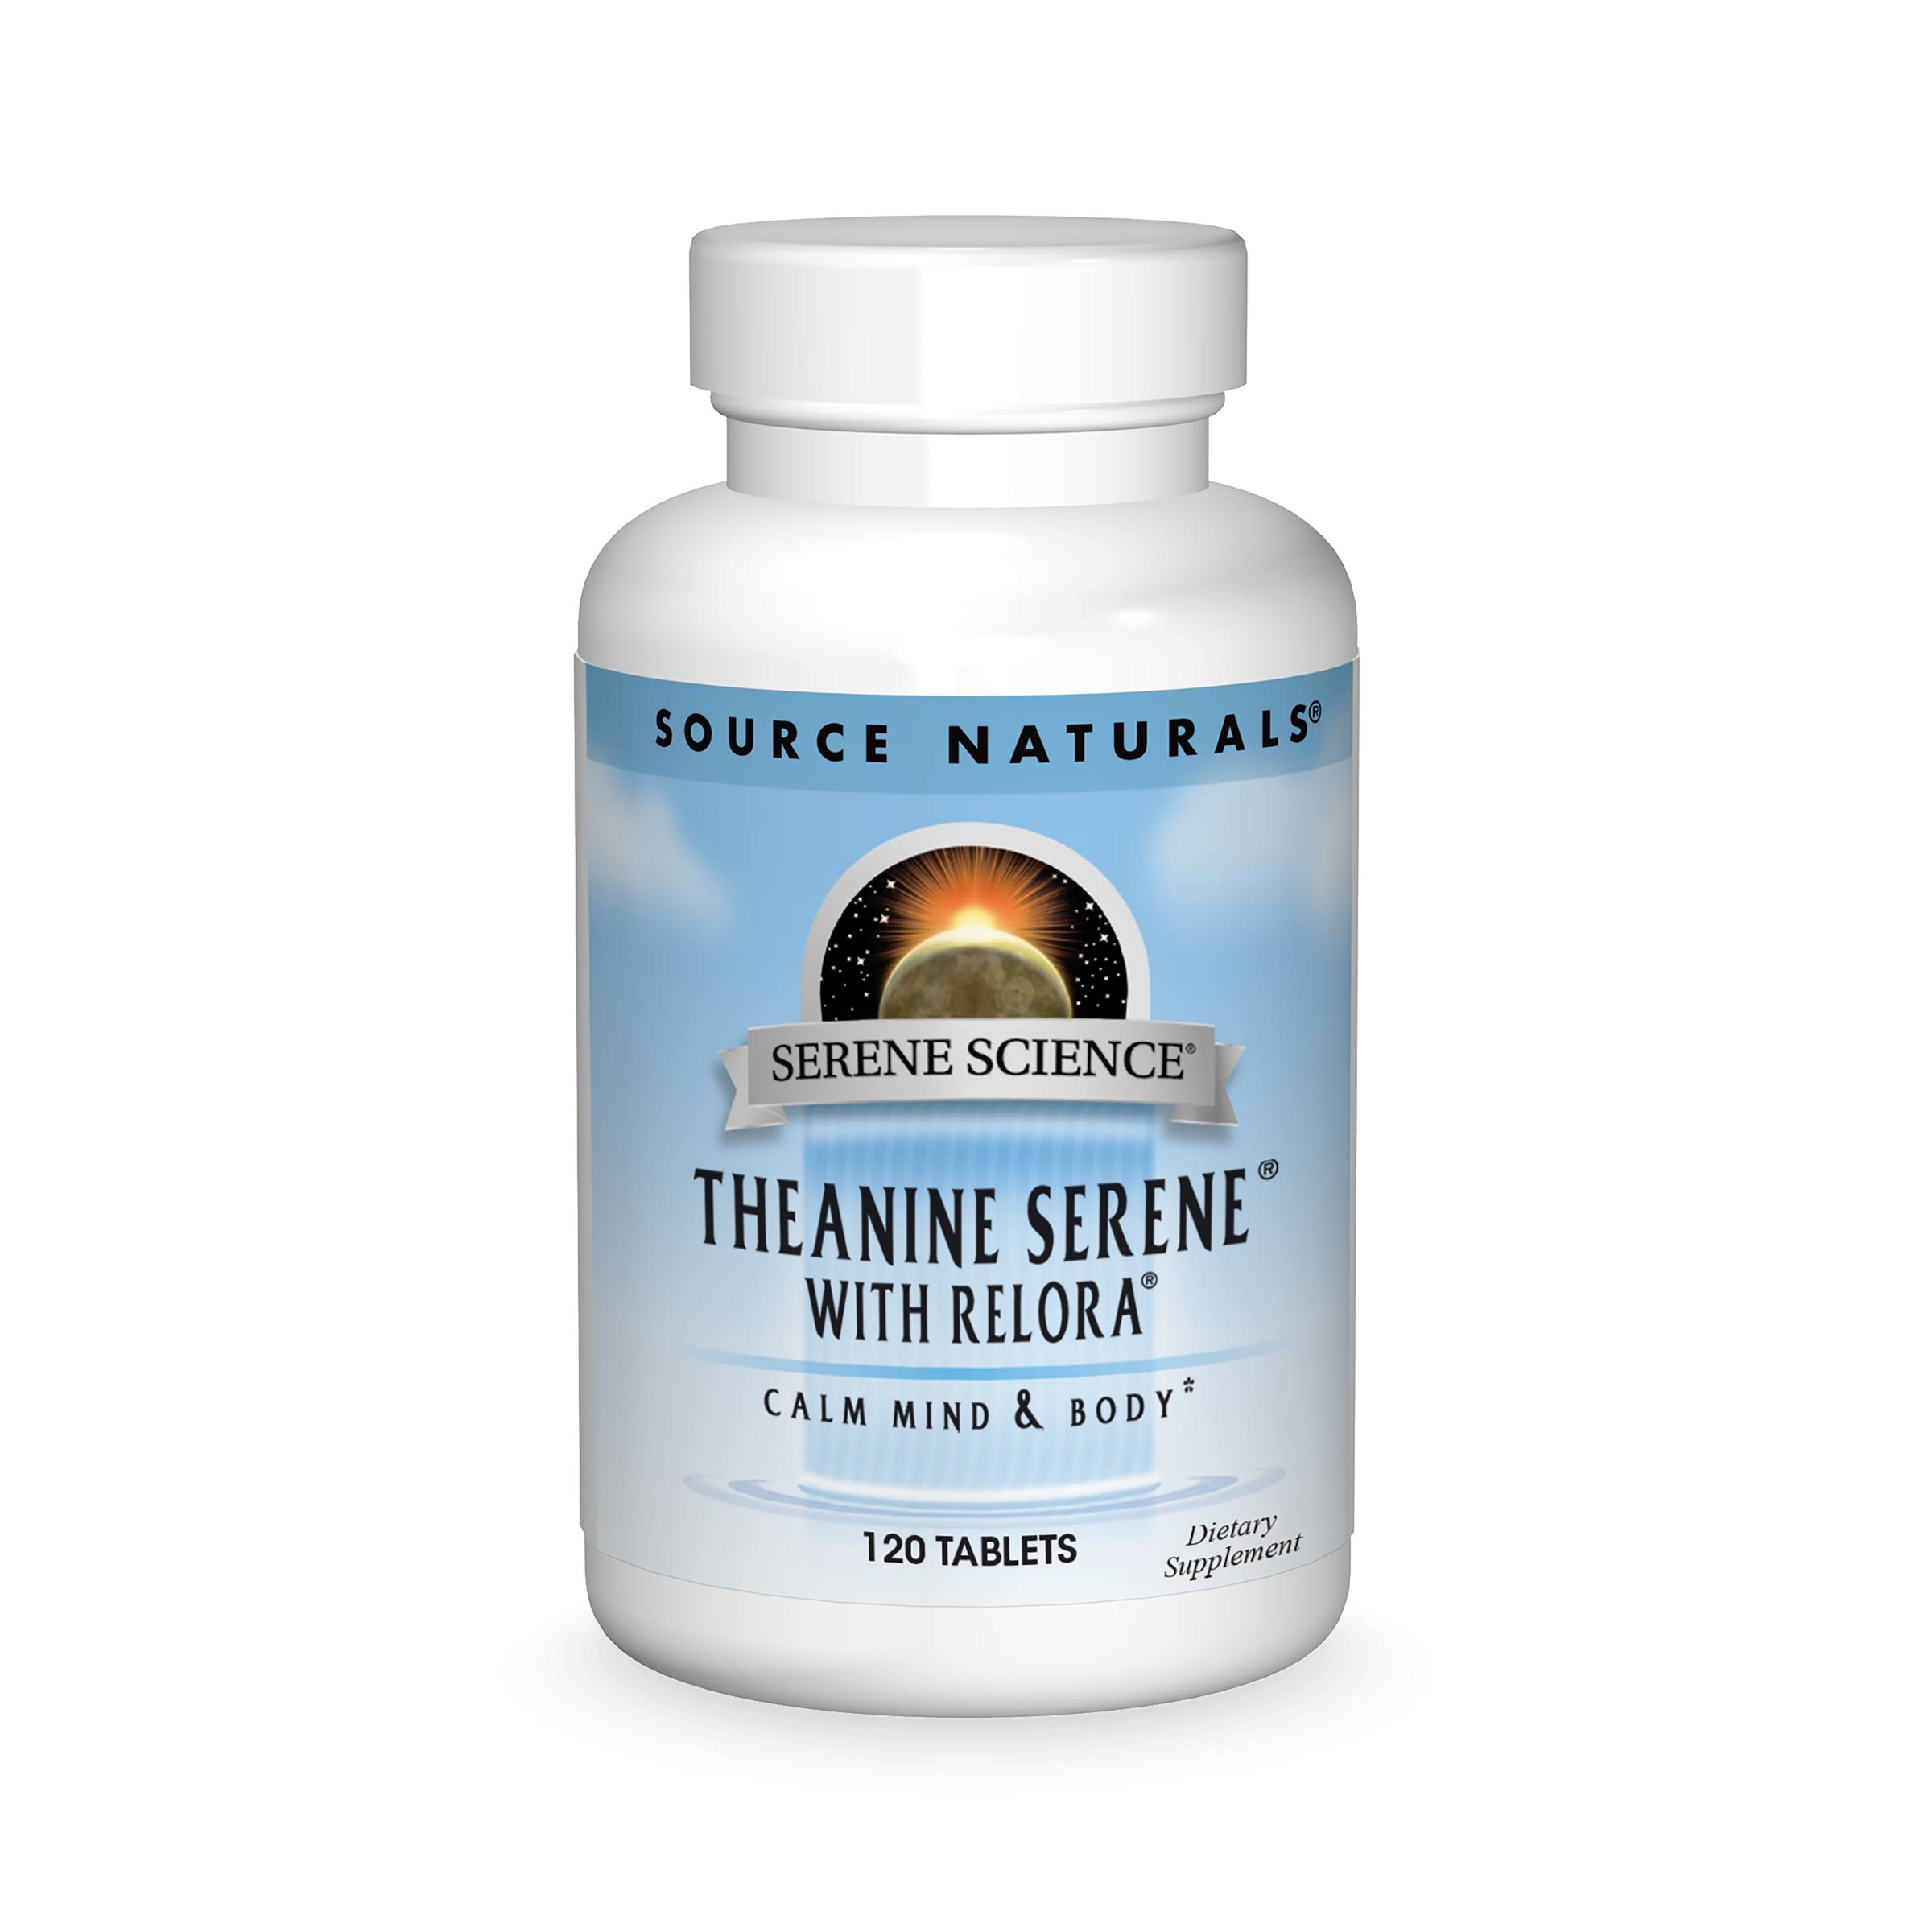 Source Naturals Theanine Serene with Relora - 120 Tablets